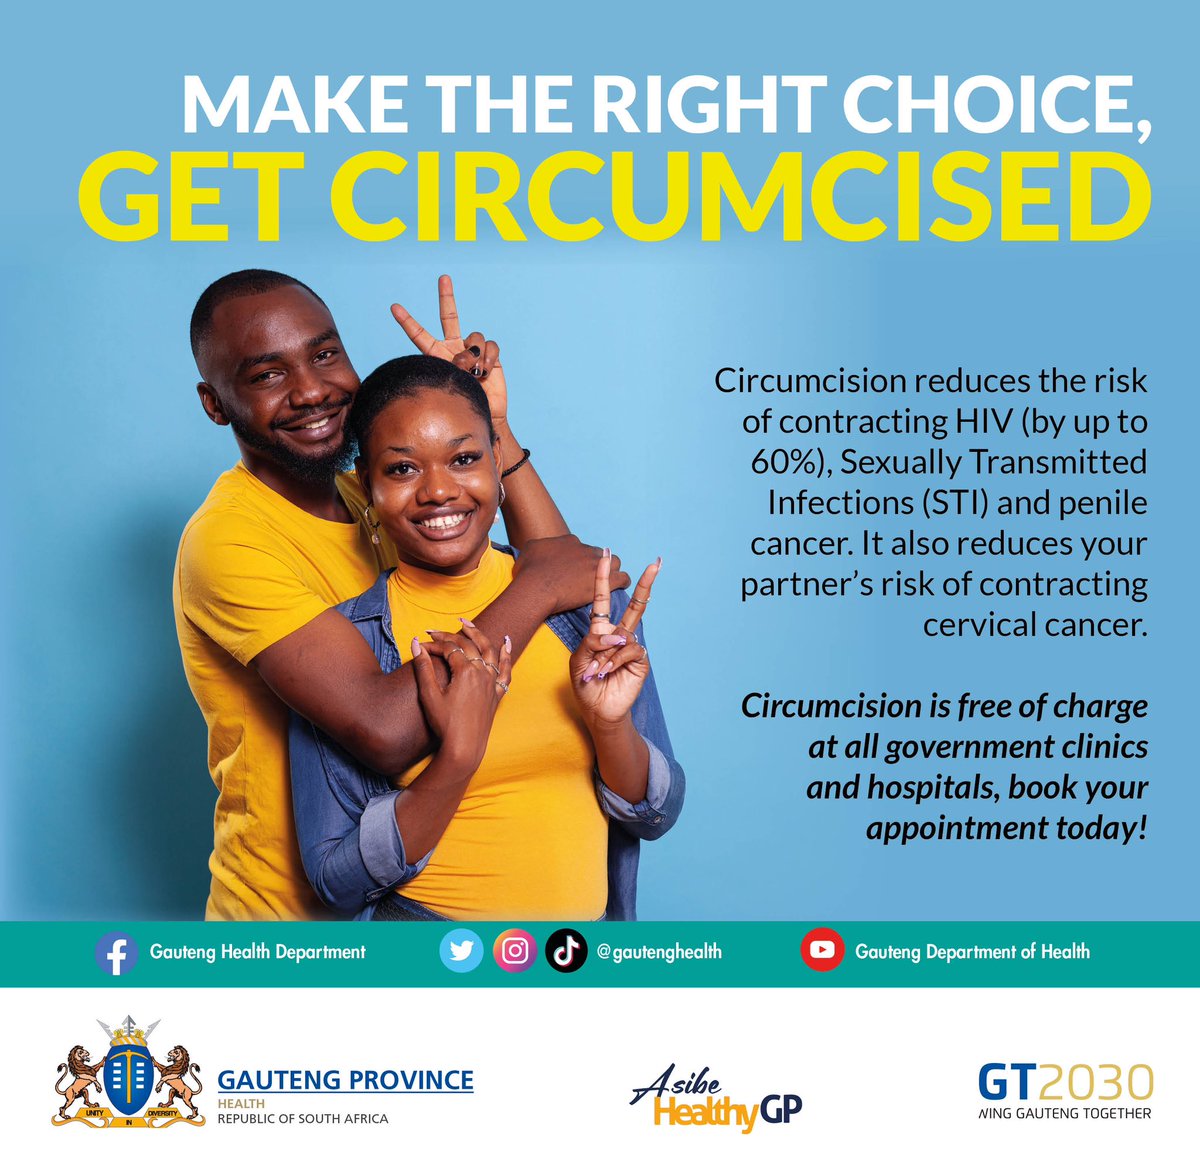 Protect yourself and partner against STIs and cancer. Book your appointment today #AsibeHealthyGP #MakeTheRightChoice